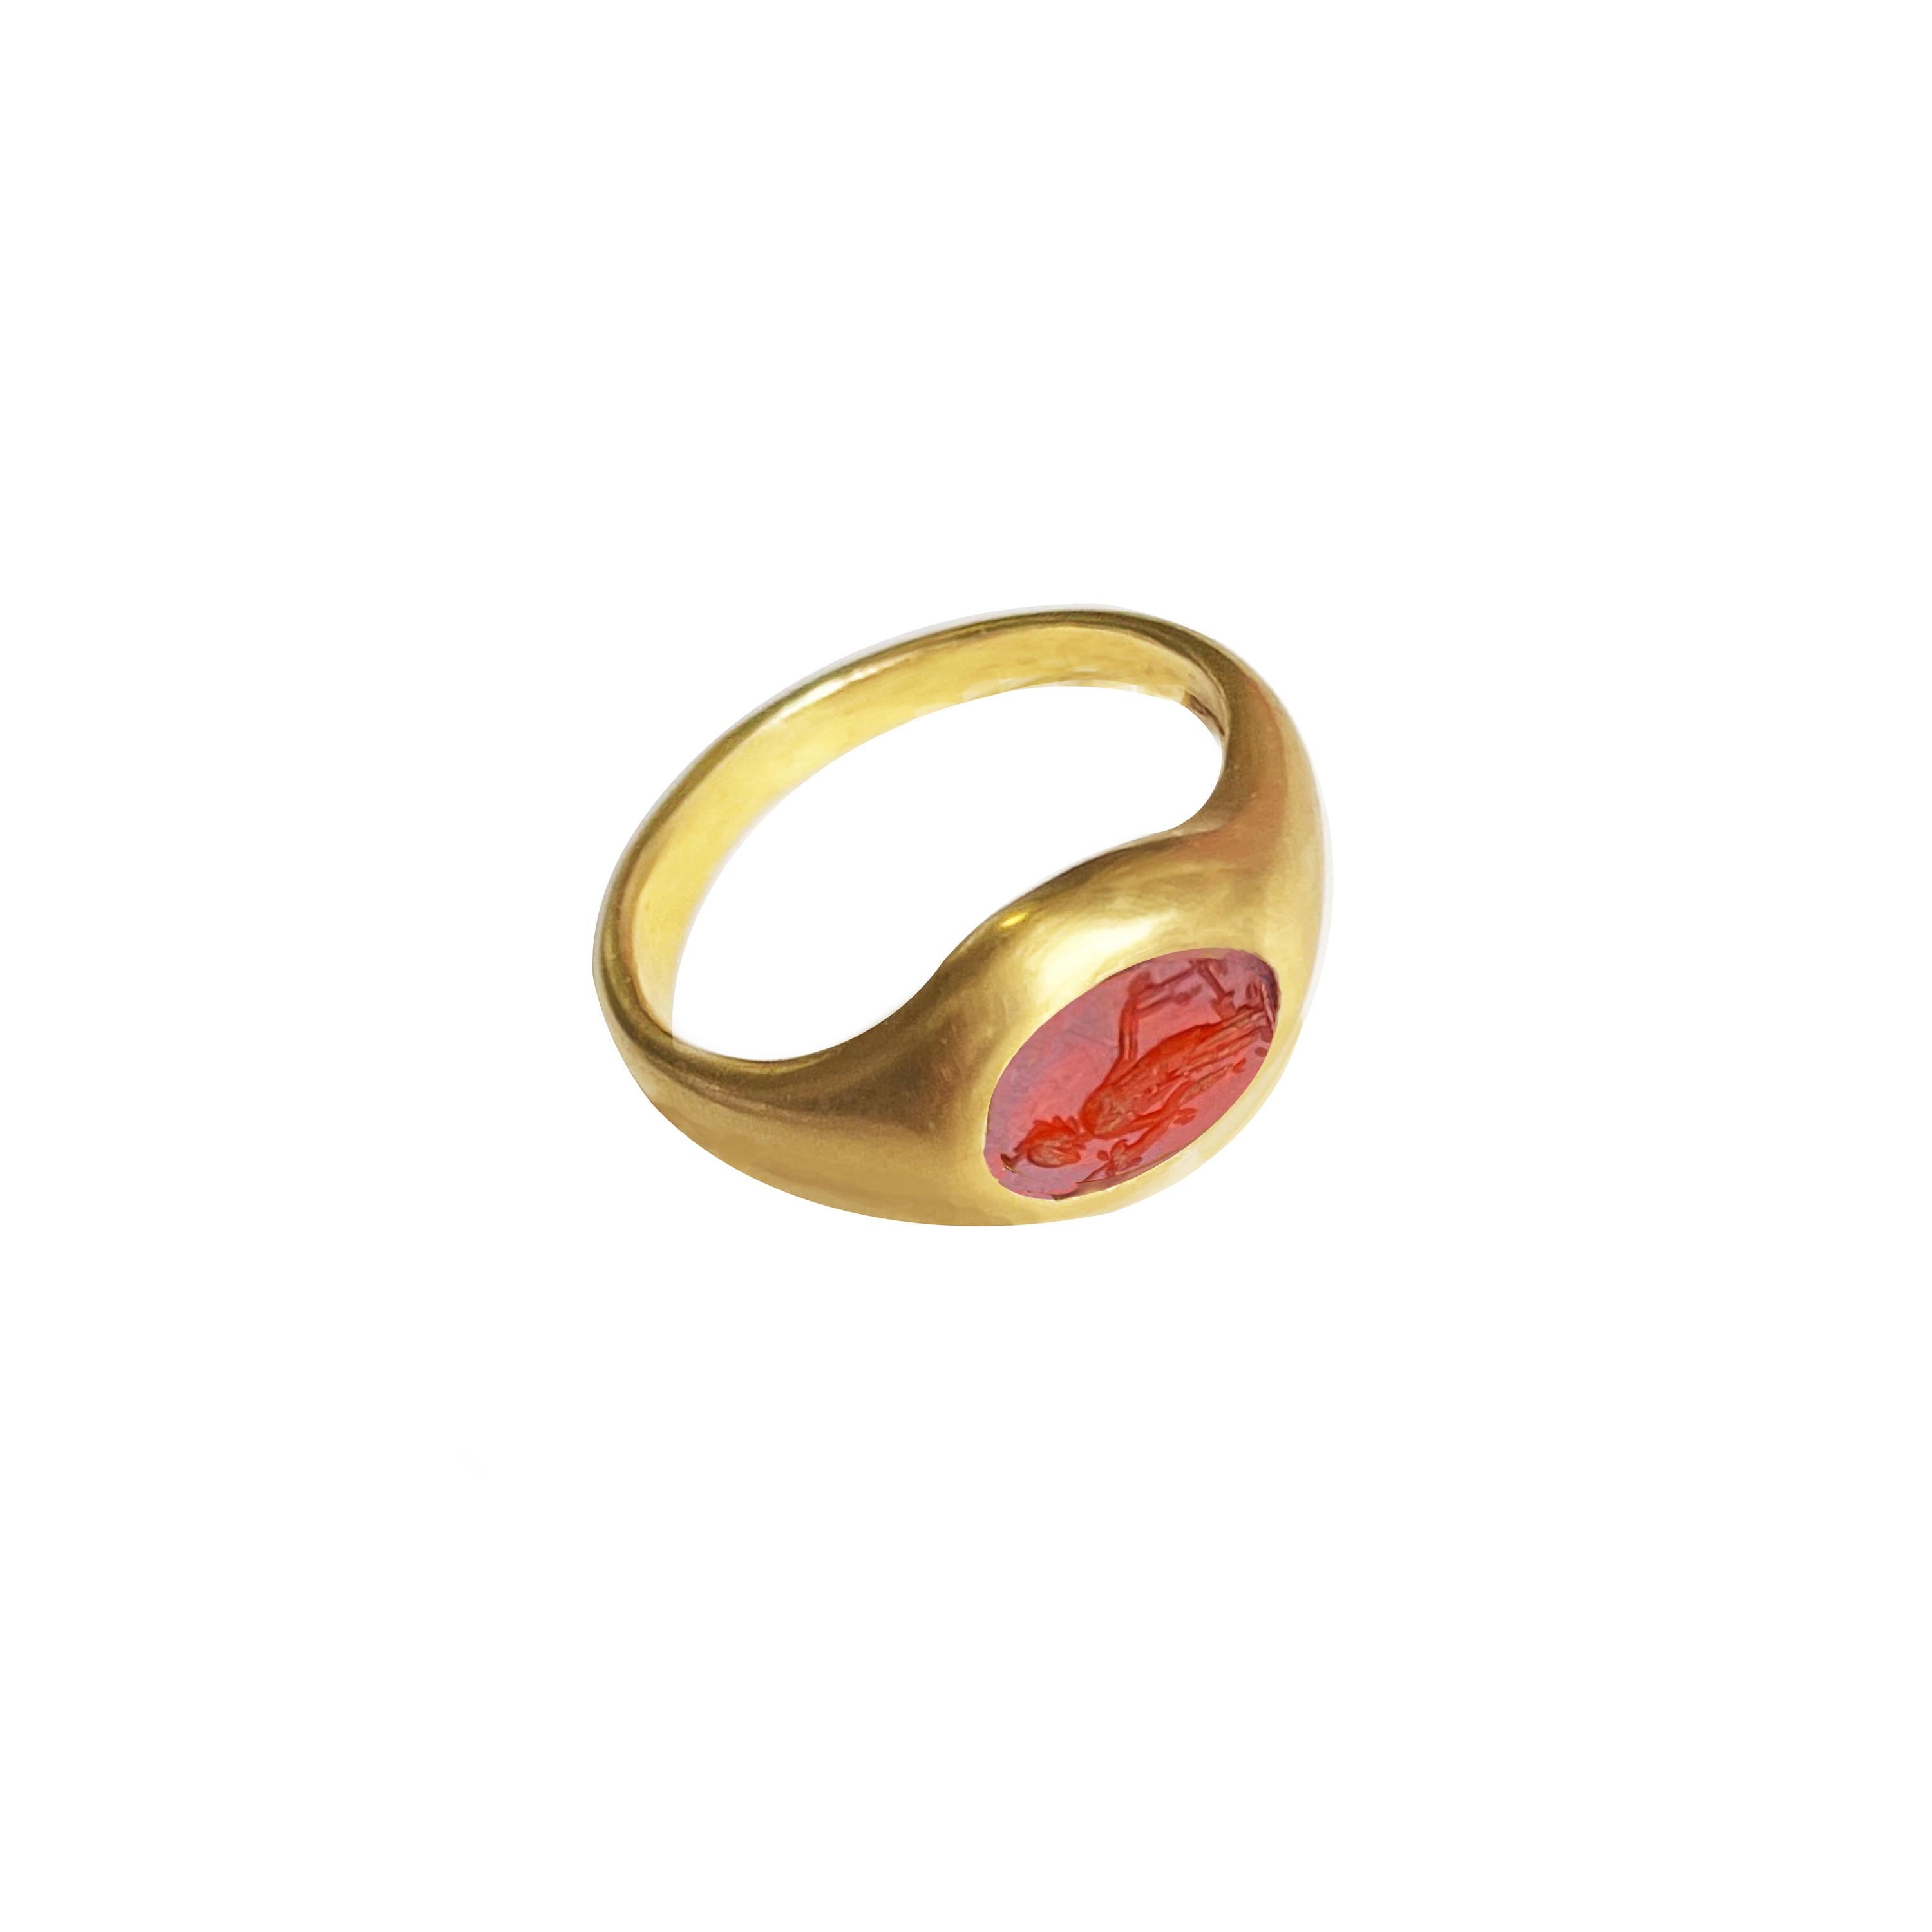 This 18 Kt gold ring, from SERRA archeological collection, use genuine ancient Roman  intaglio on carnelian, that date circa 2- cent.A.D, depicting a Tyche, that  in ancient Roman religion was the personified Goddess of Fortune .
Fortune (Latin: